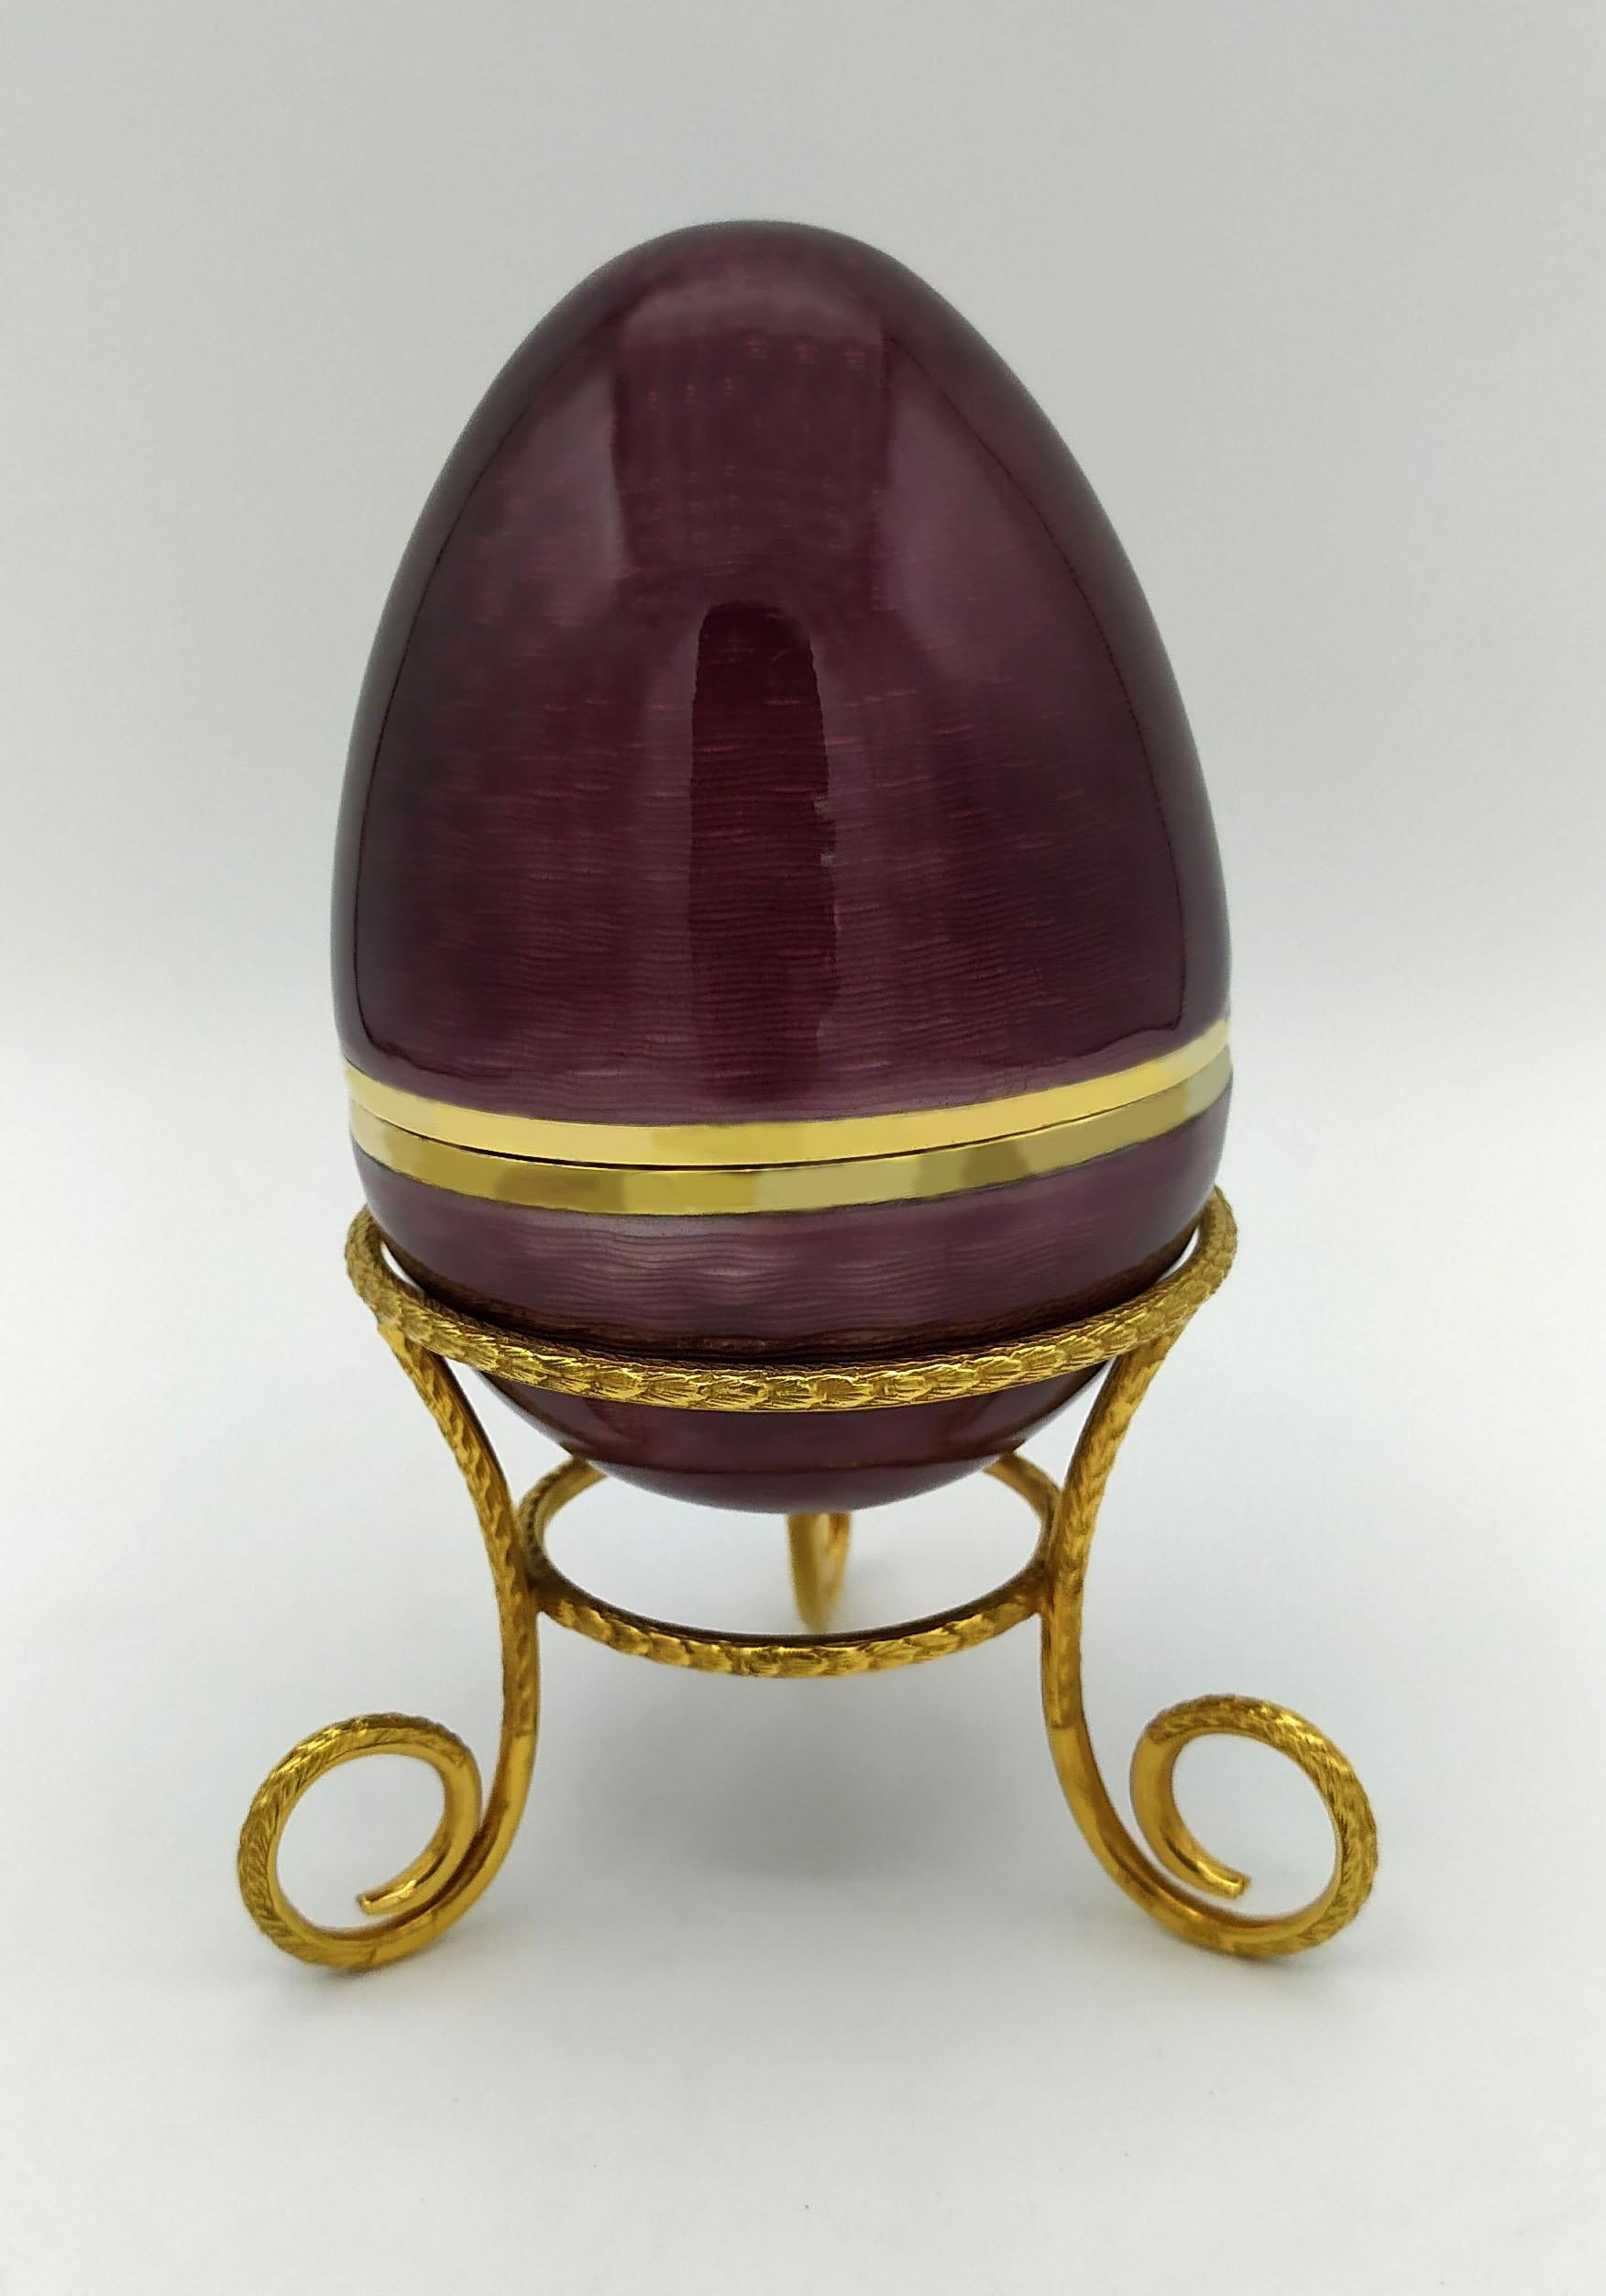 Egg on tripod in 925/1000 sterling silver gold plated with translucent fired enamel on guillochè, Russian Empire style inspired by Carl Fabergè eggs late 1800s, early 1900s. Measurements: diameter of the egg cm. 6.7 cm high. 9.7 resting on a